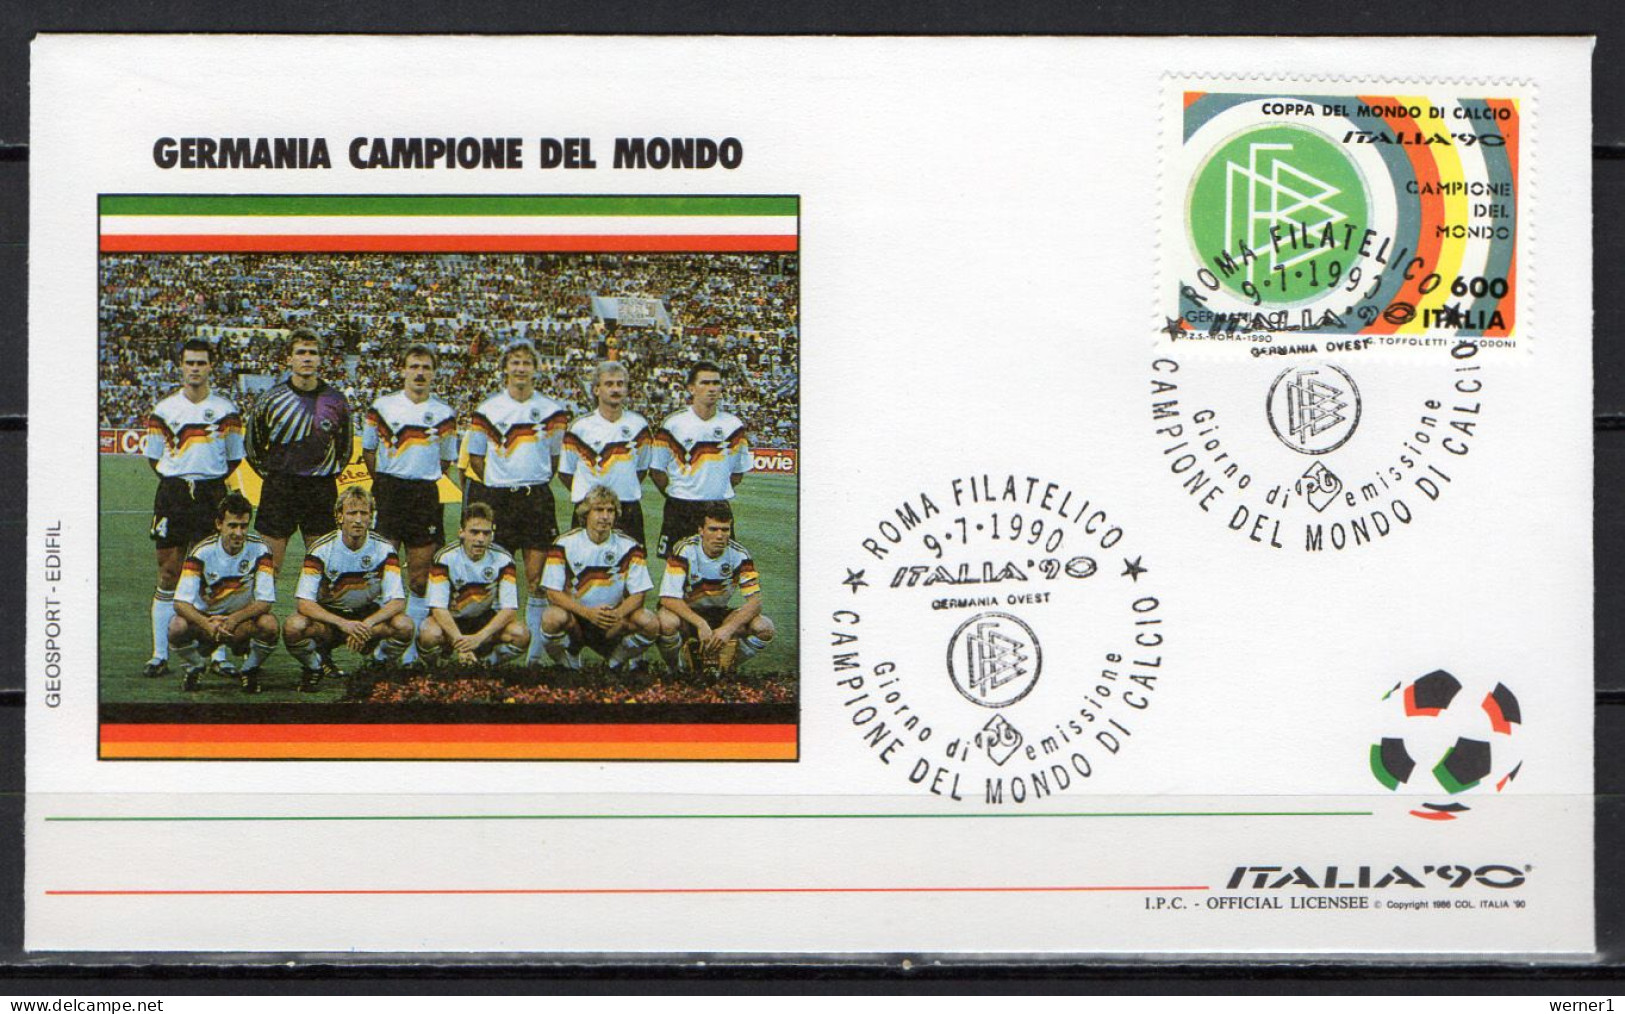 Italy 1990 Football Soccer World Cup Stamp On FDC (Germany World Cup Champion) - 1990 – Italy